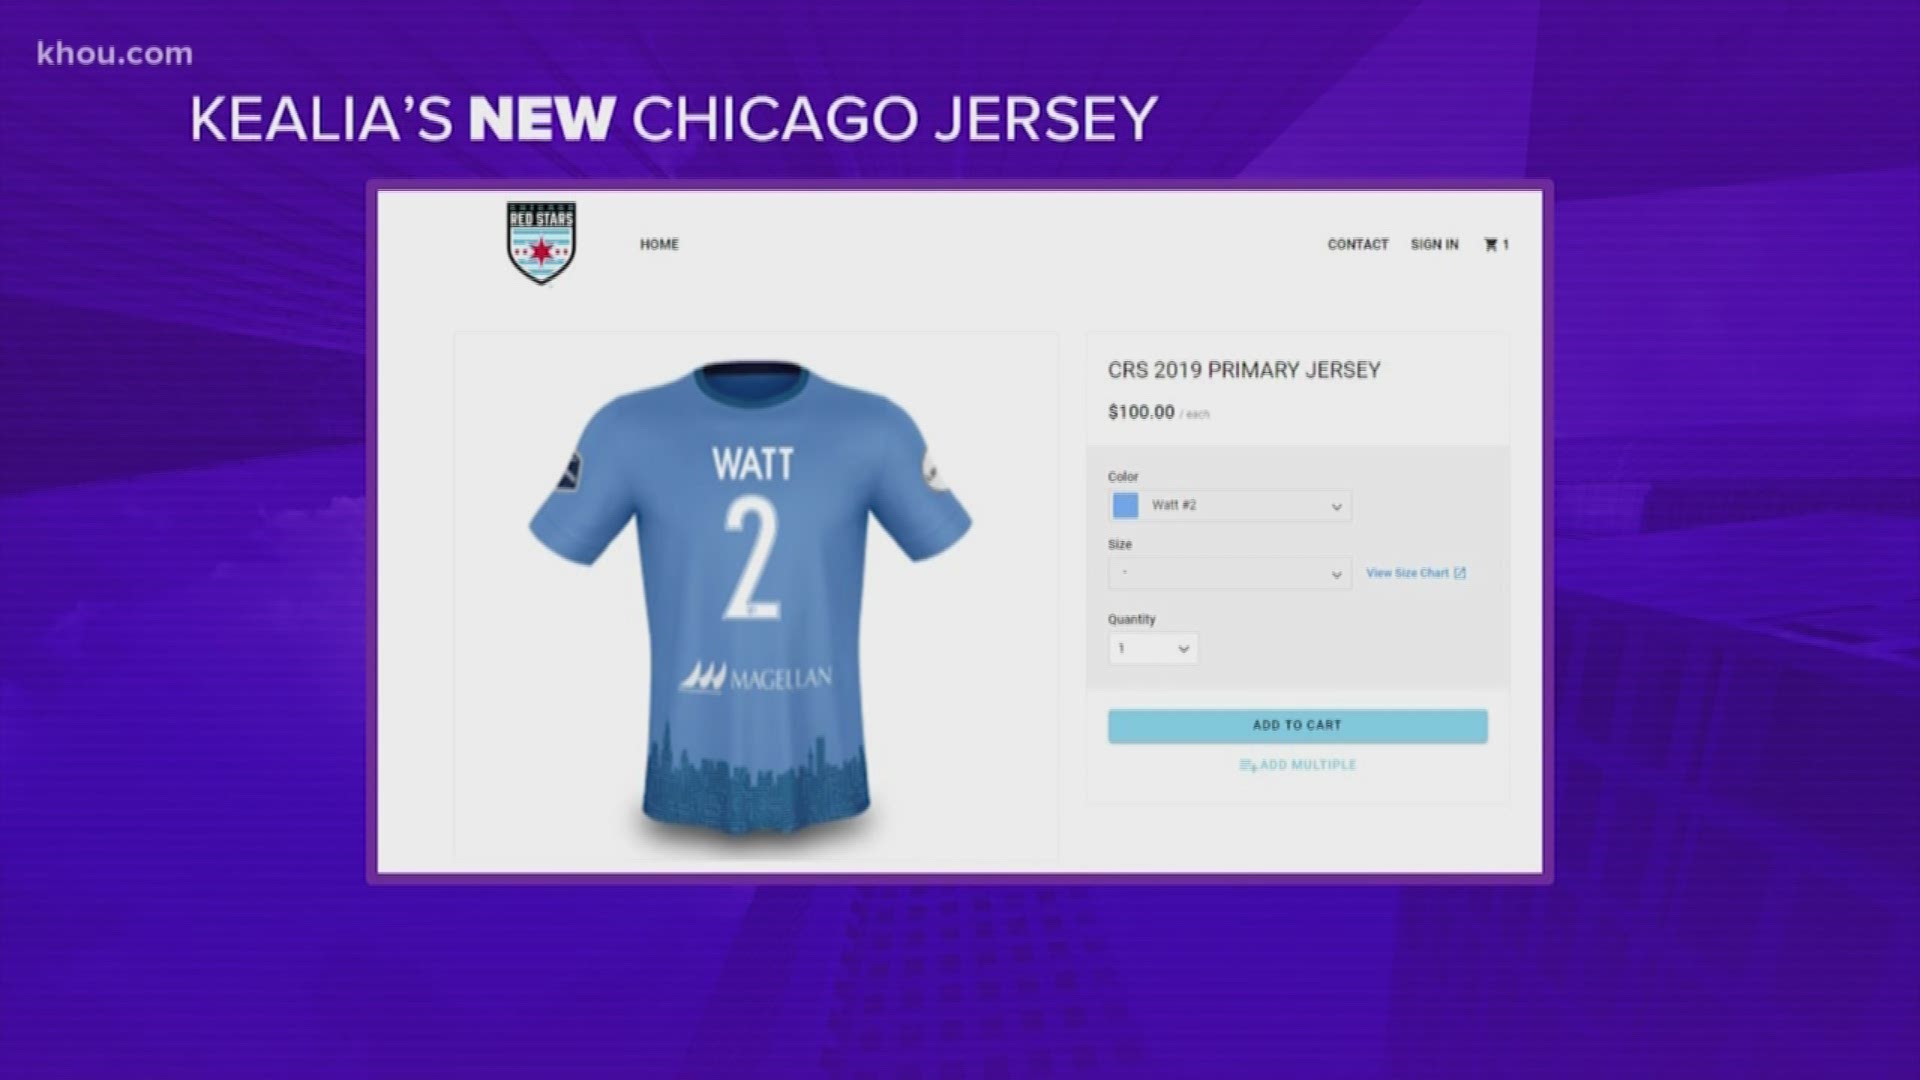 Now that Kealia Ohia is officially Mrs. Watt, her new soccer team - Chicago Red Stars - are selling jerseys with her new last name for $100.